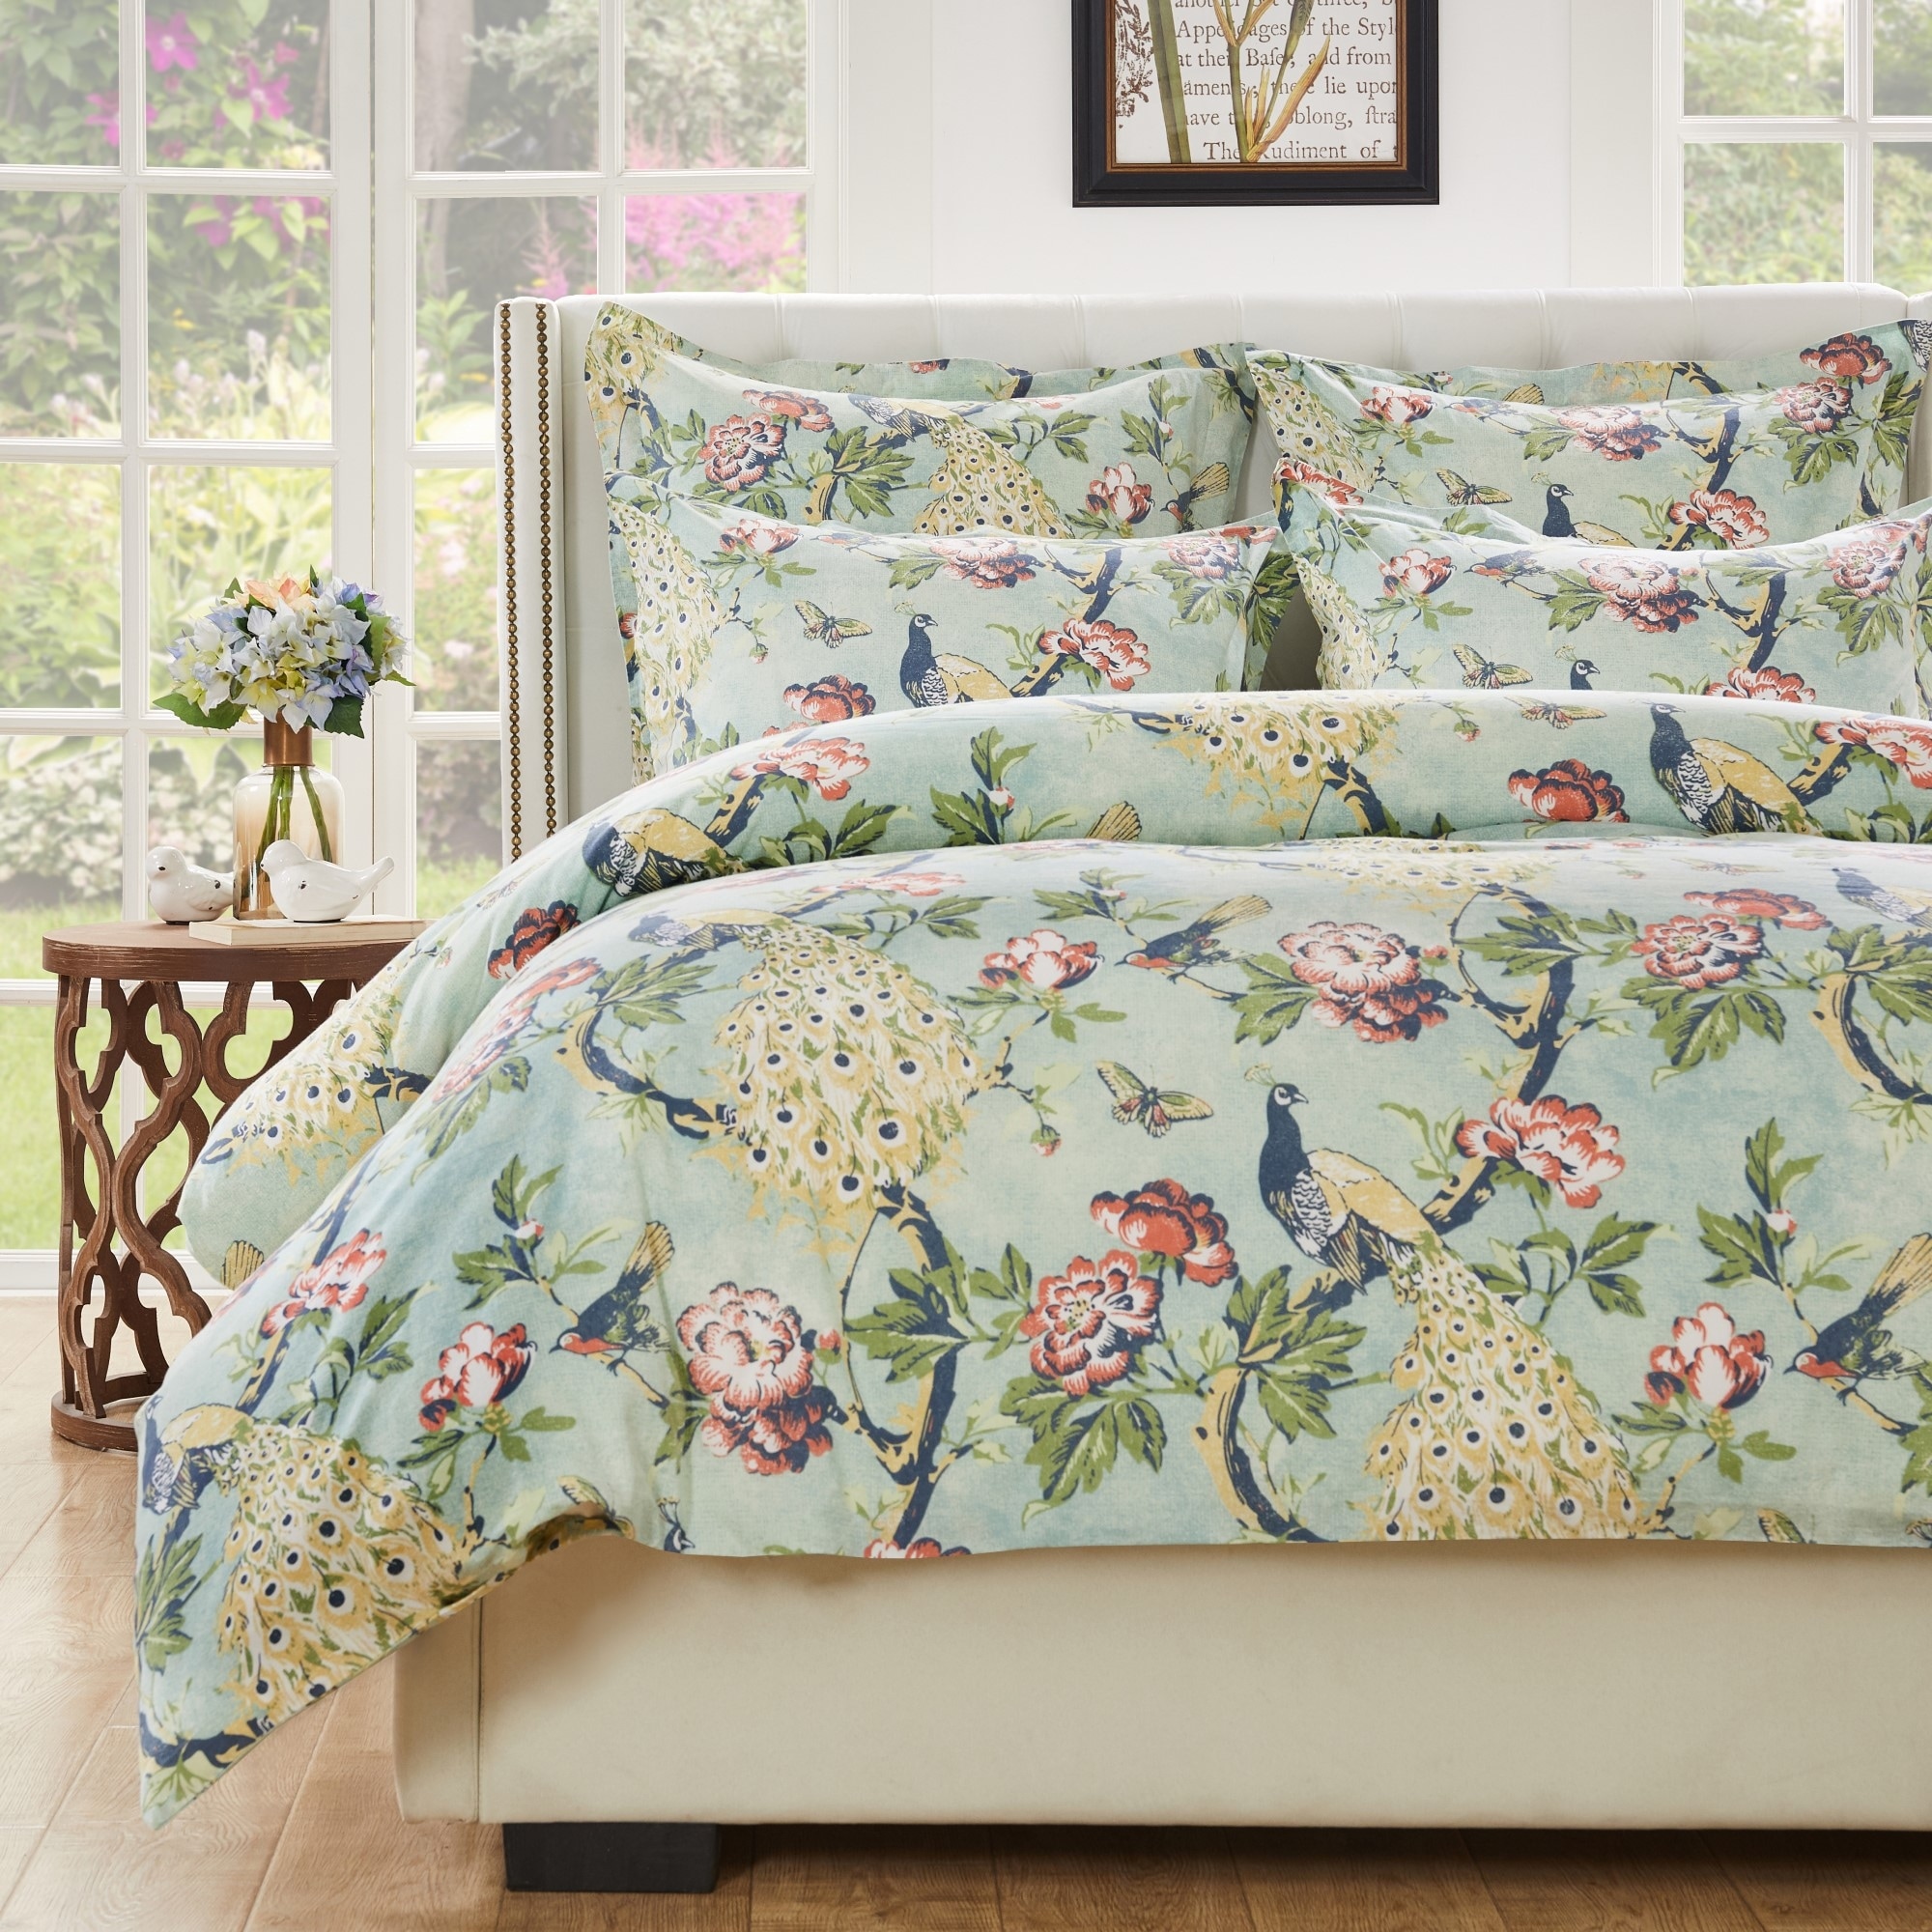 Nature Duvet Covers and Sets - Bed Bath & Beyond